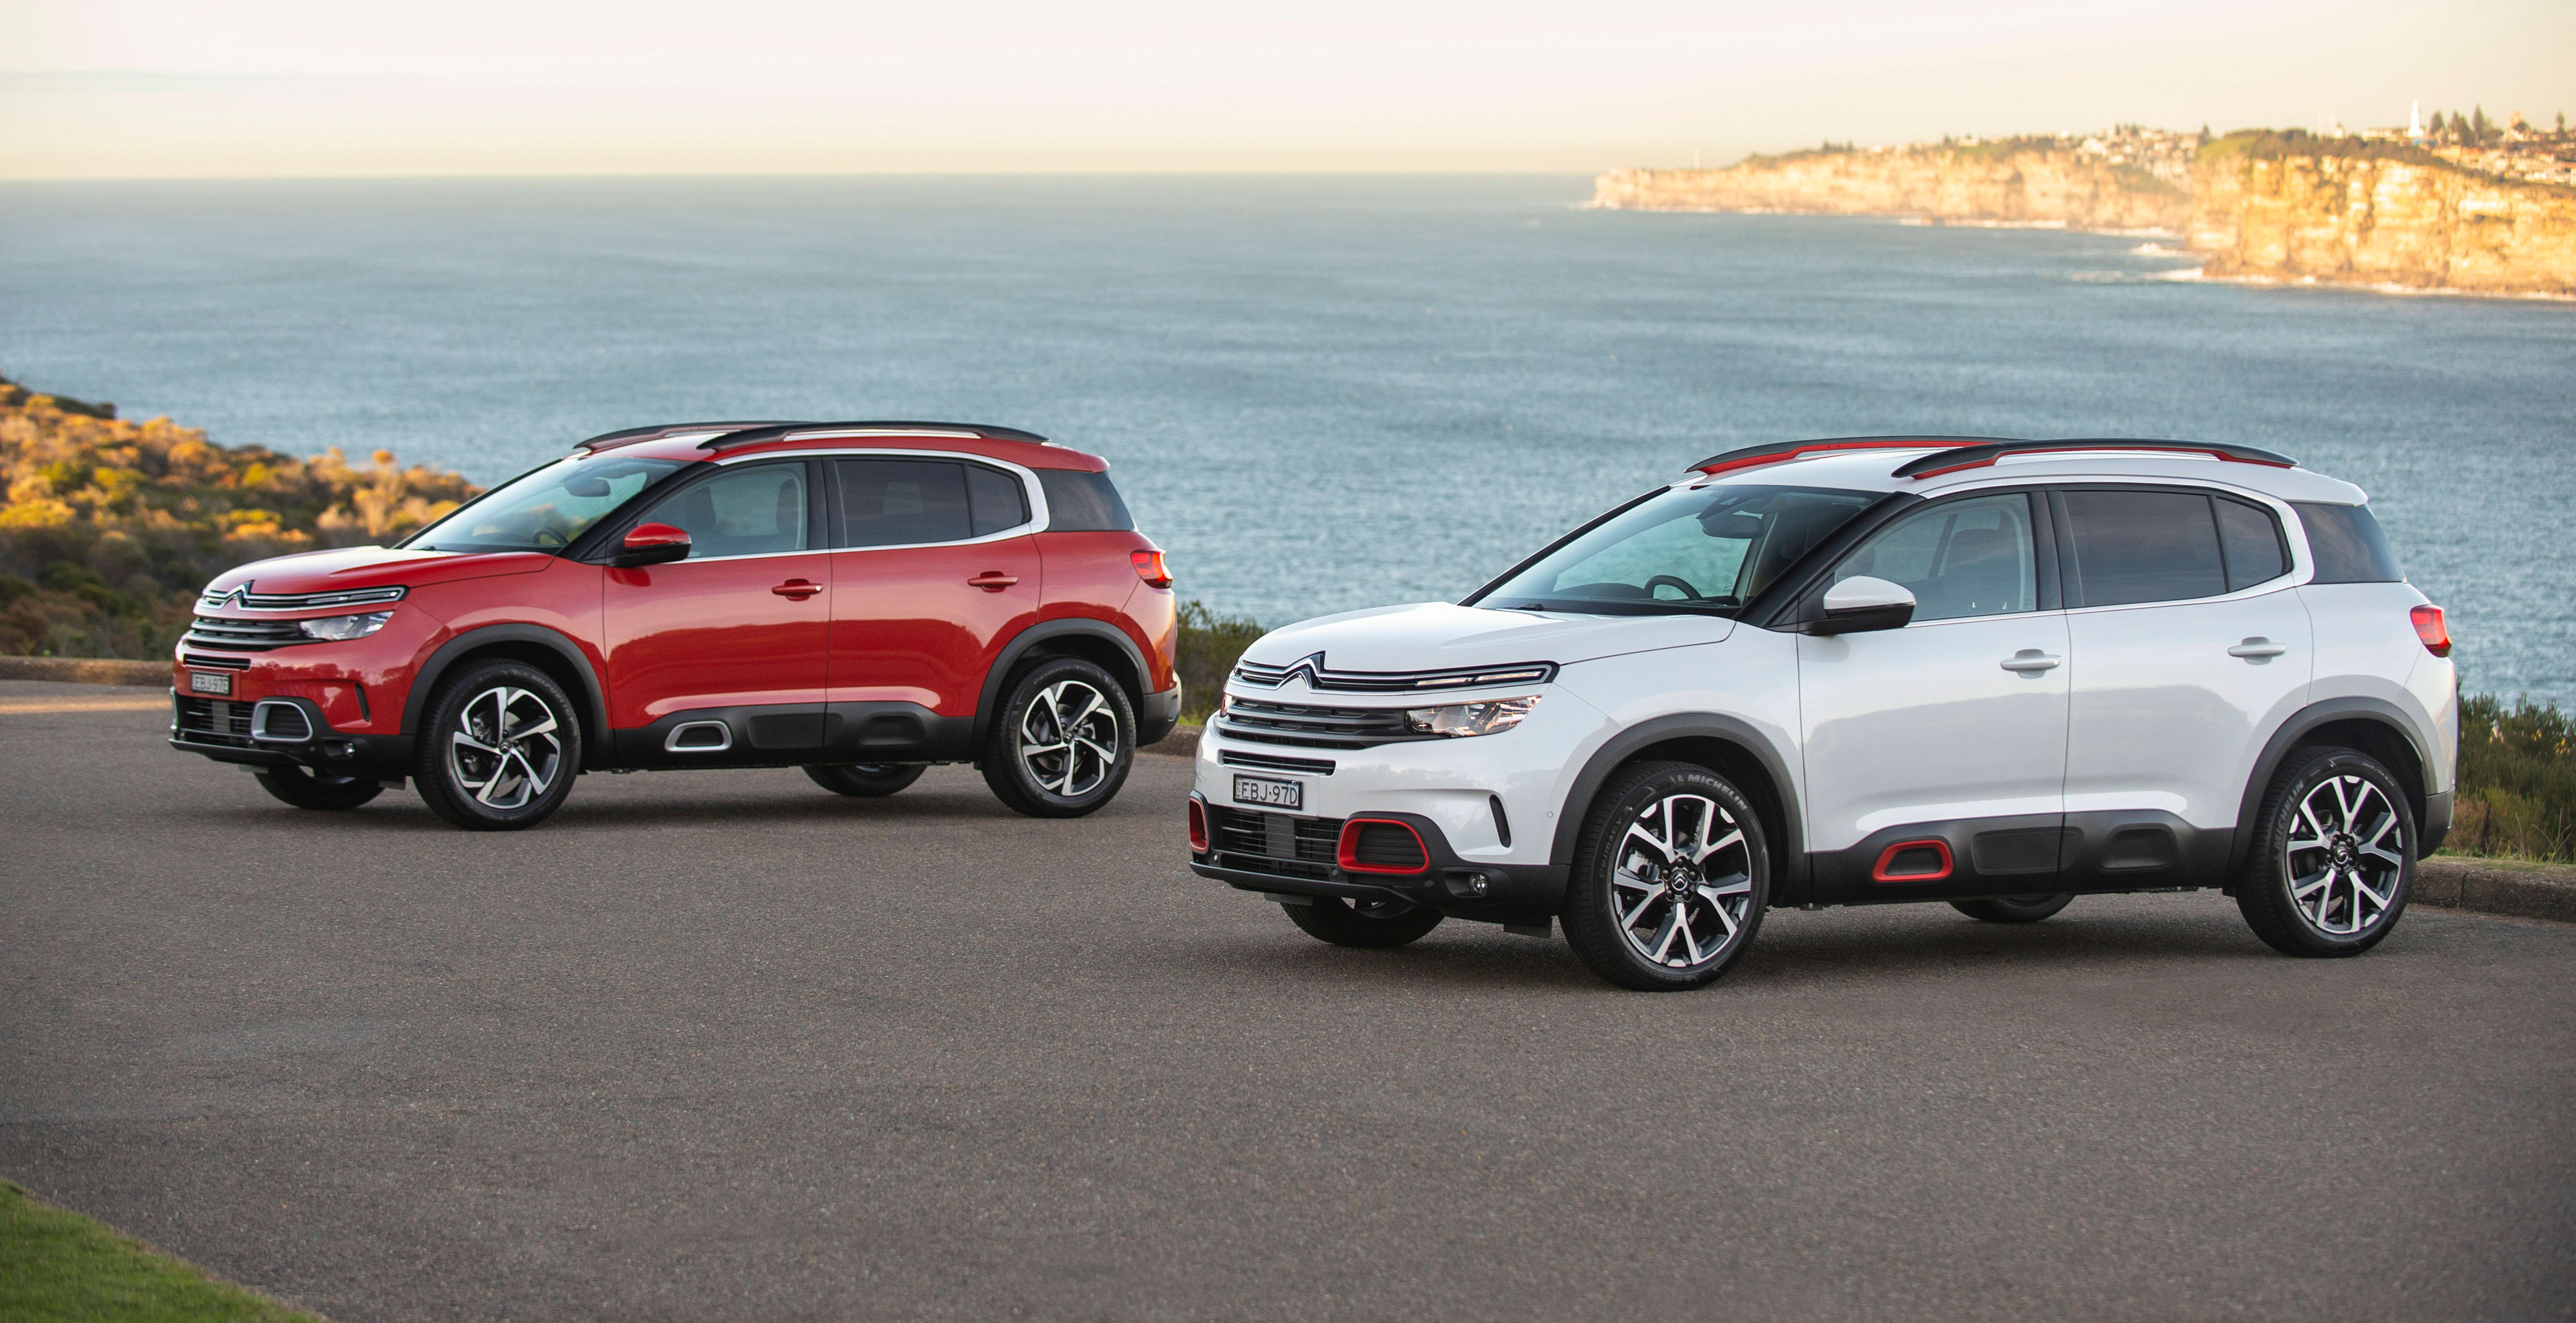 19 Citroen C5 Aircross Pricing And Specs Caradvice